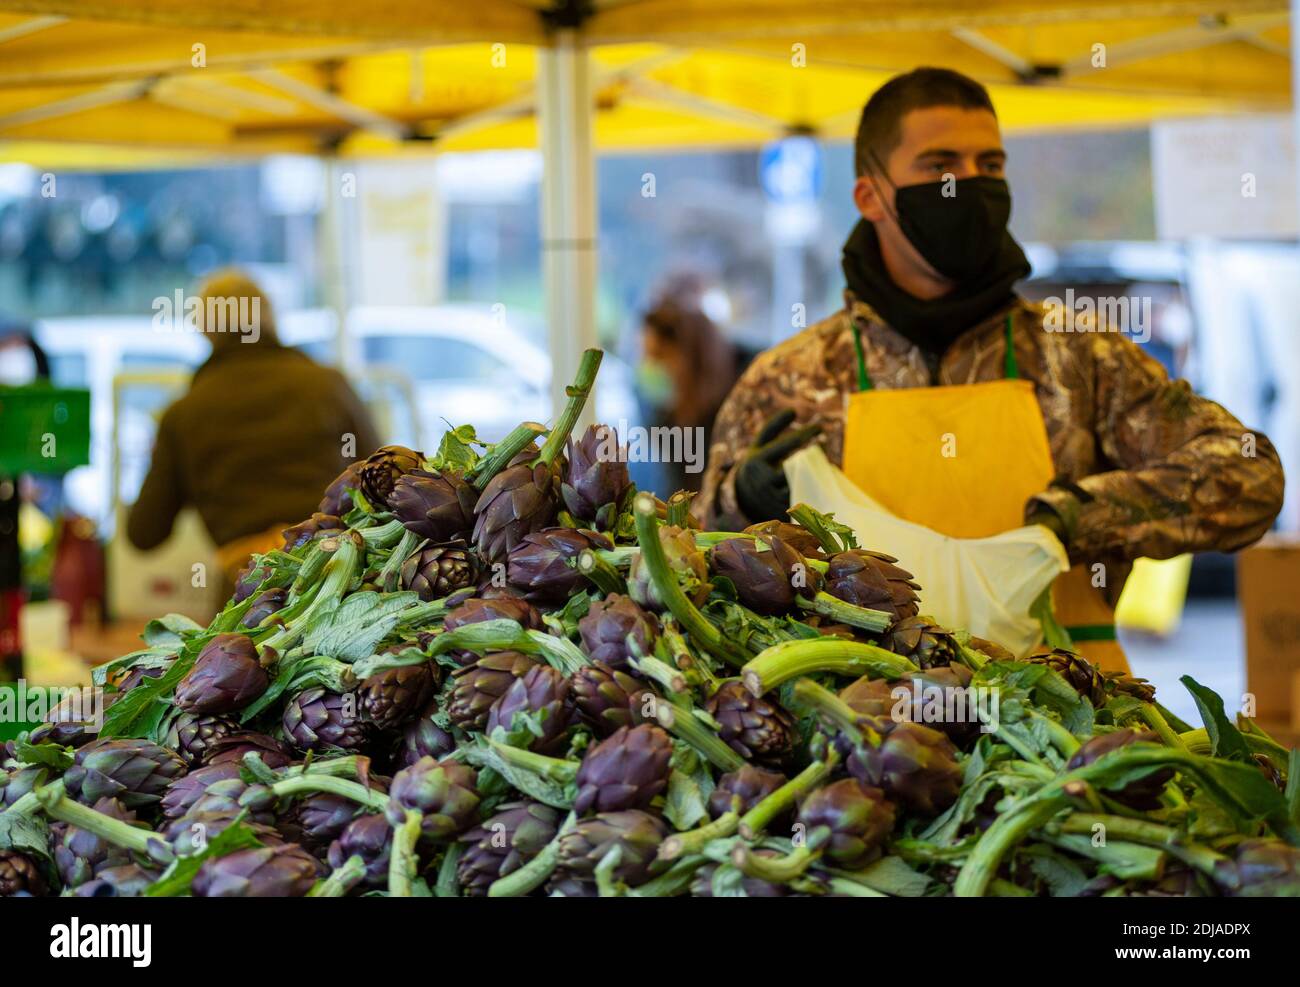 Greengrocer with black protective mask. A lot of artichokes in the foreground. Stock Photo